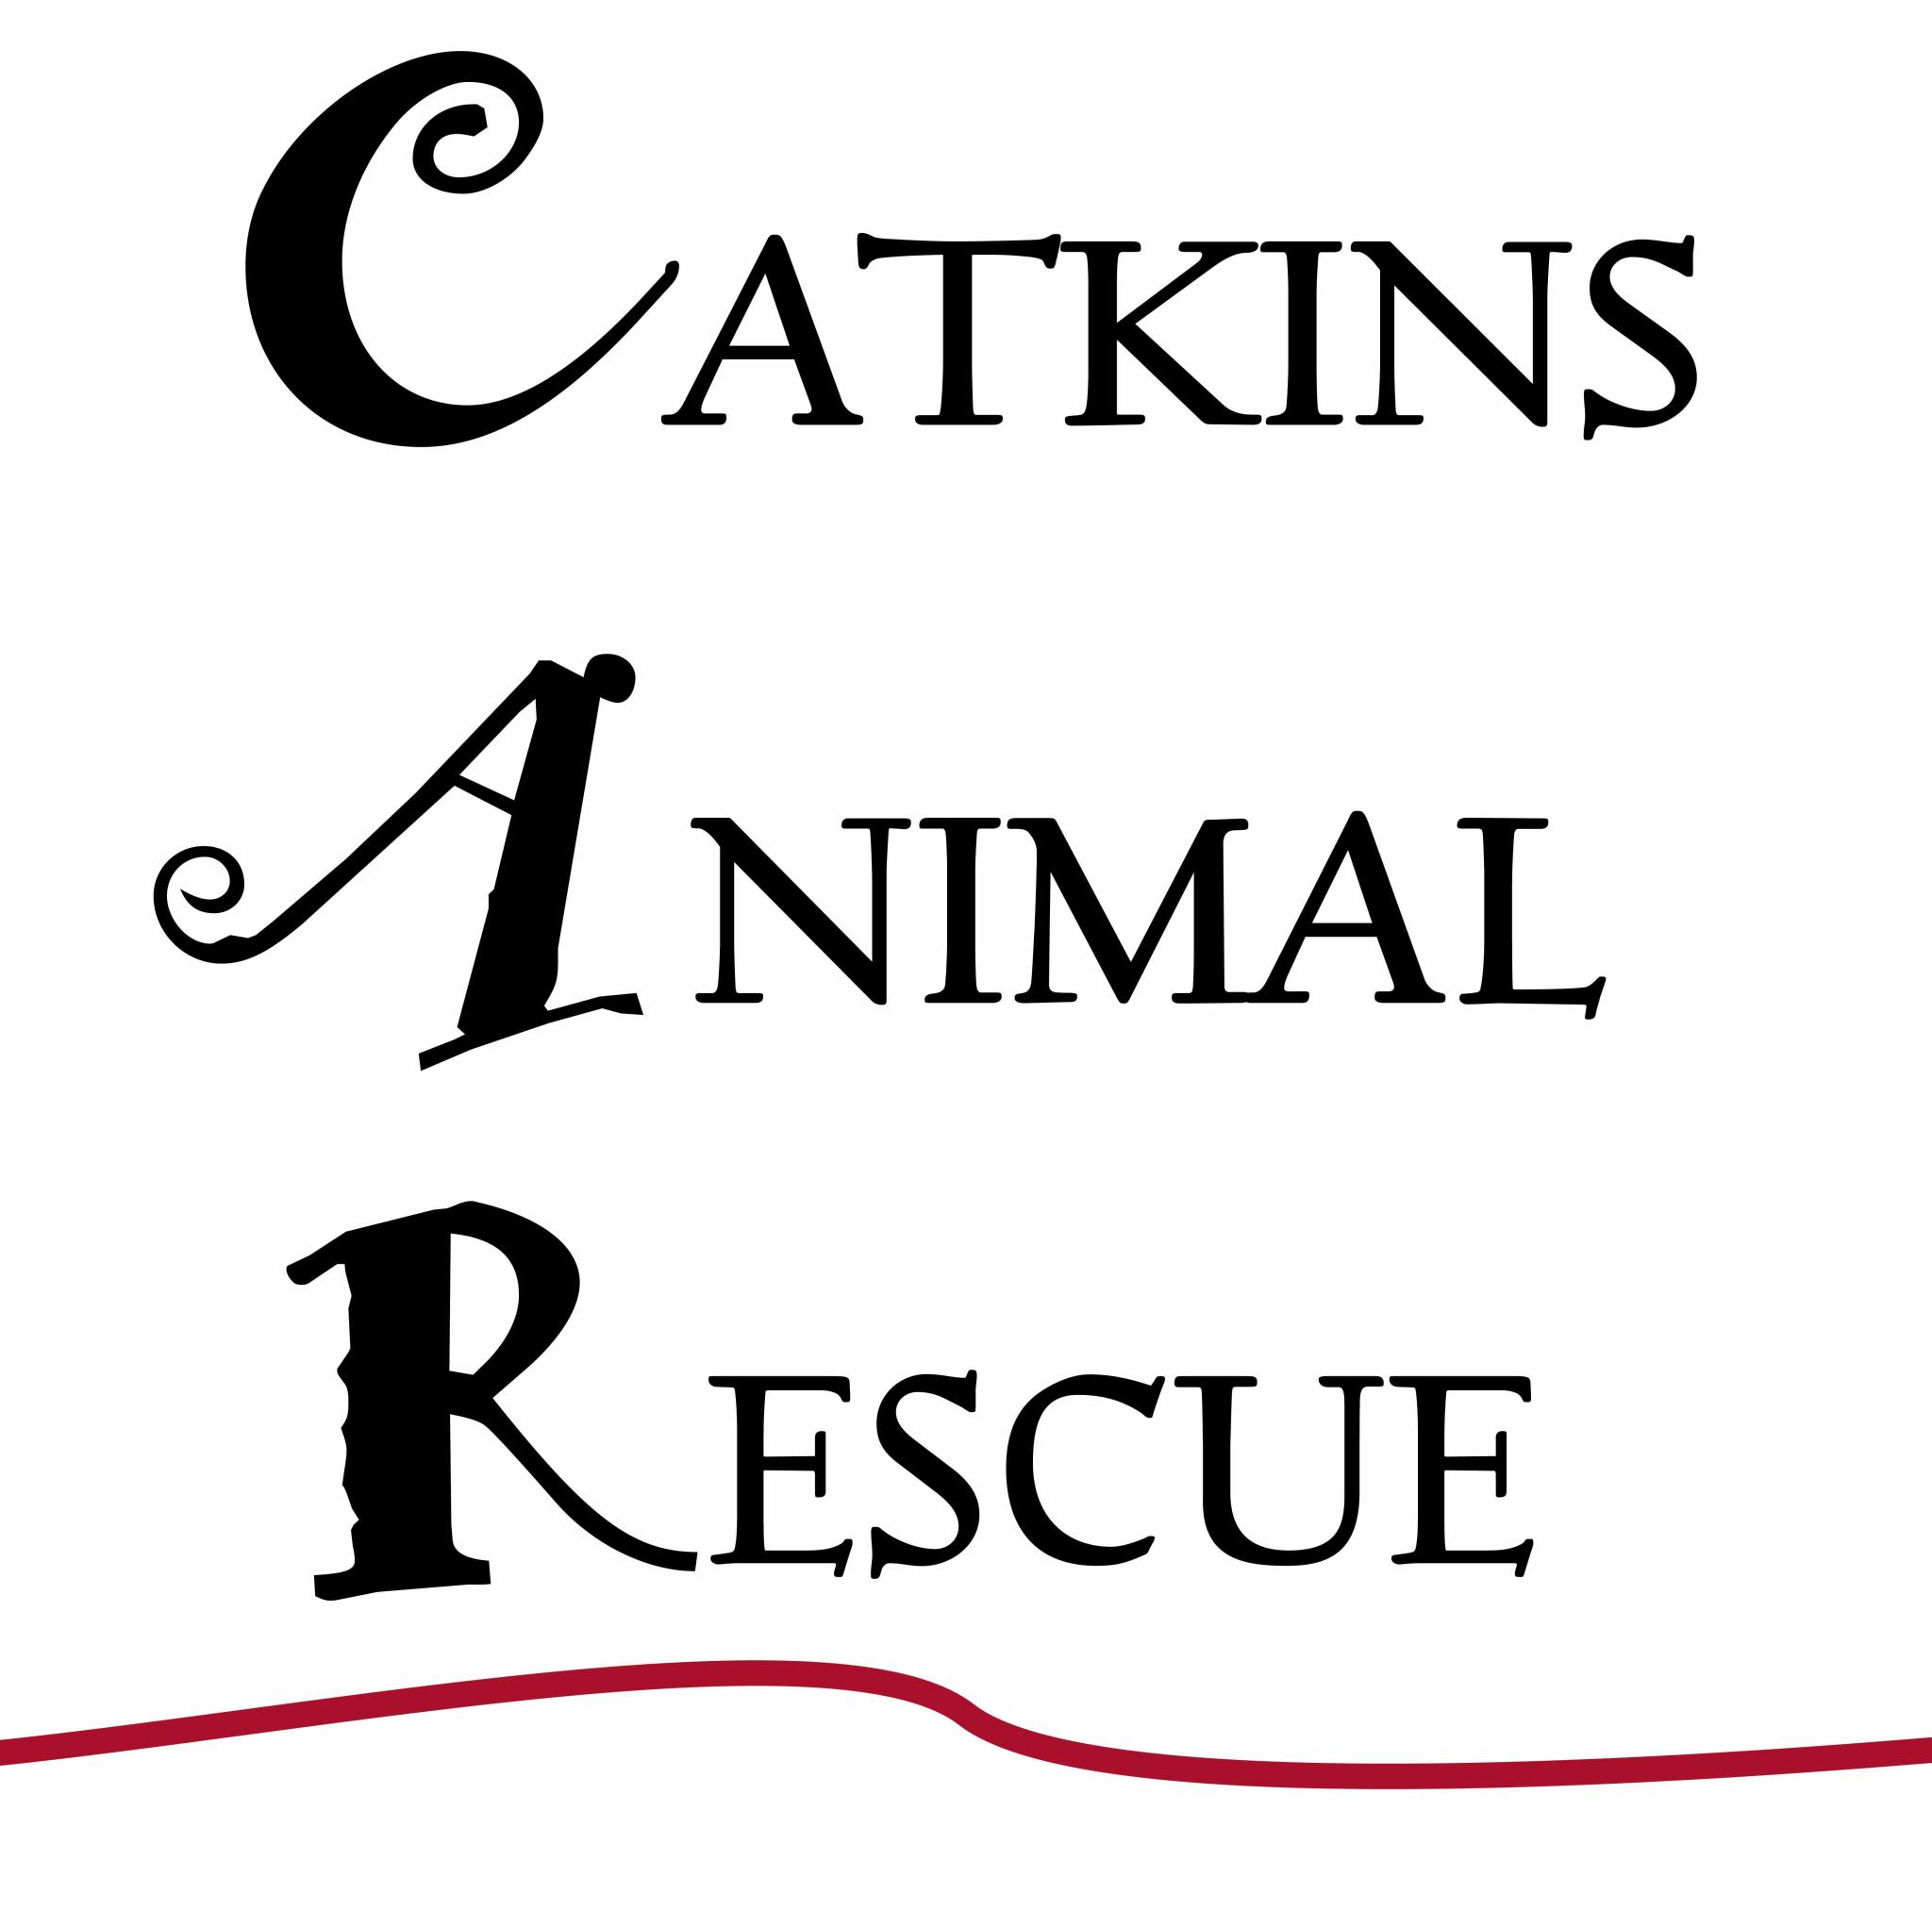 Logo for Catkins Animal Rescue